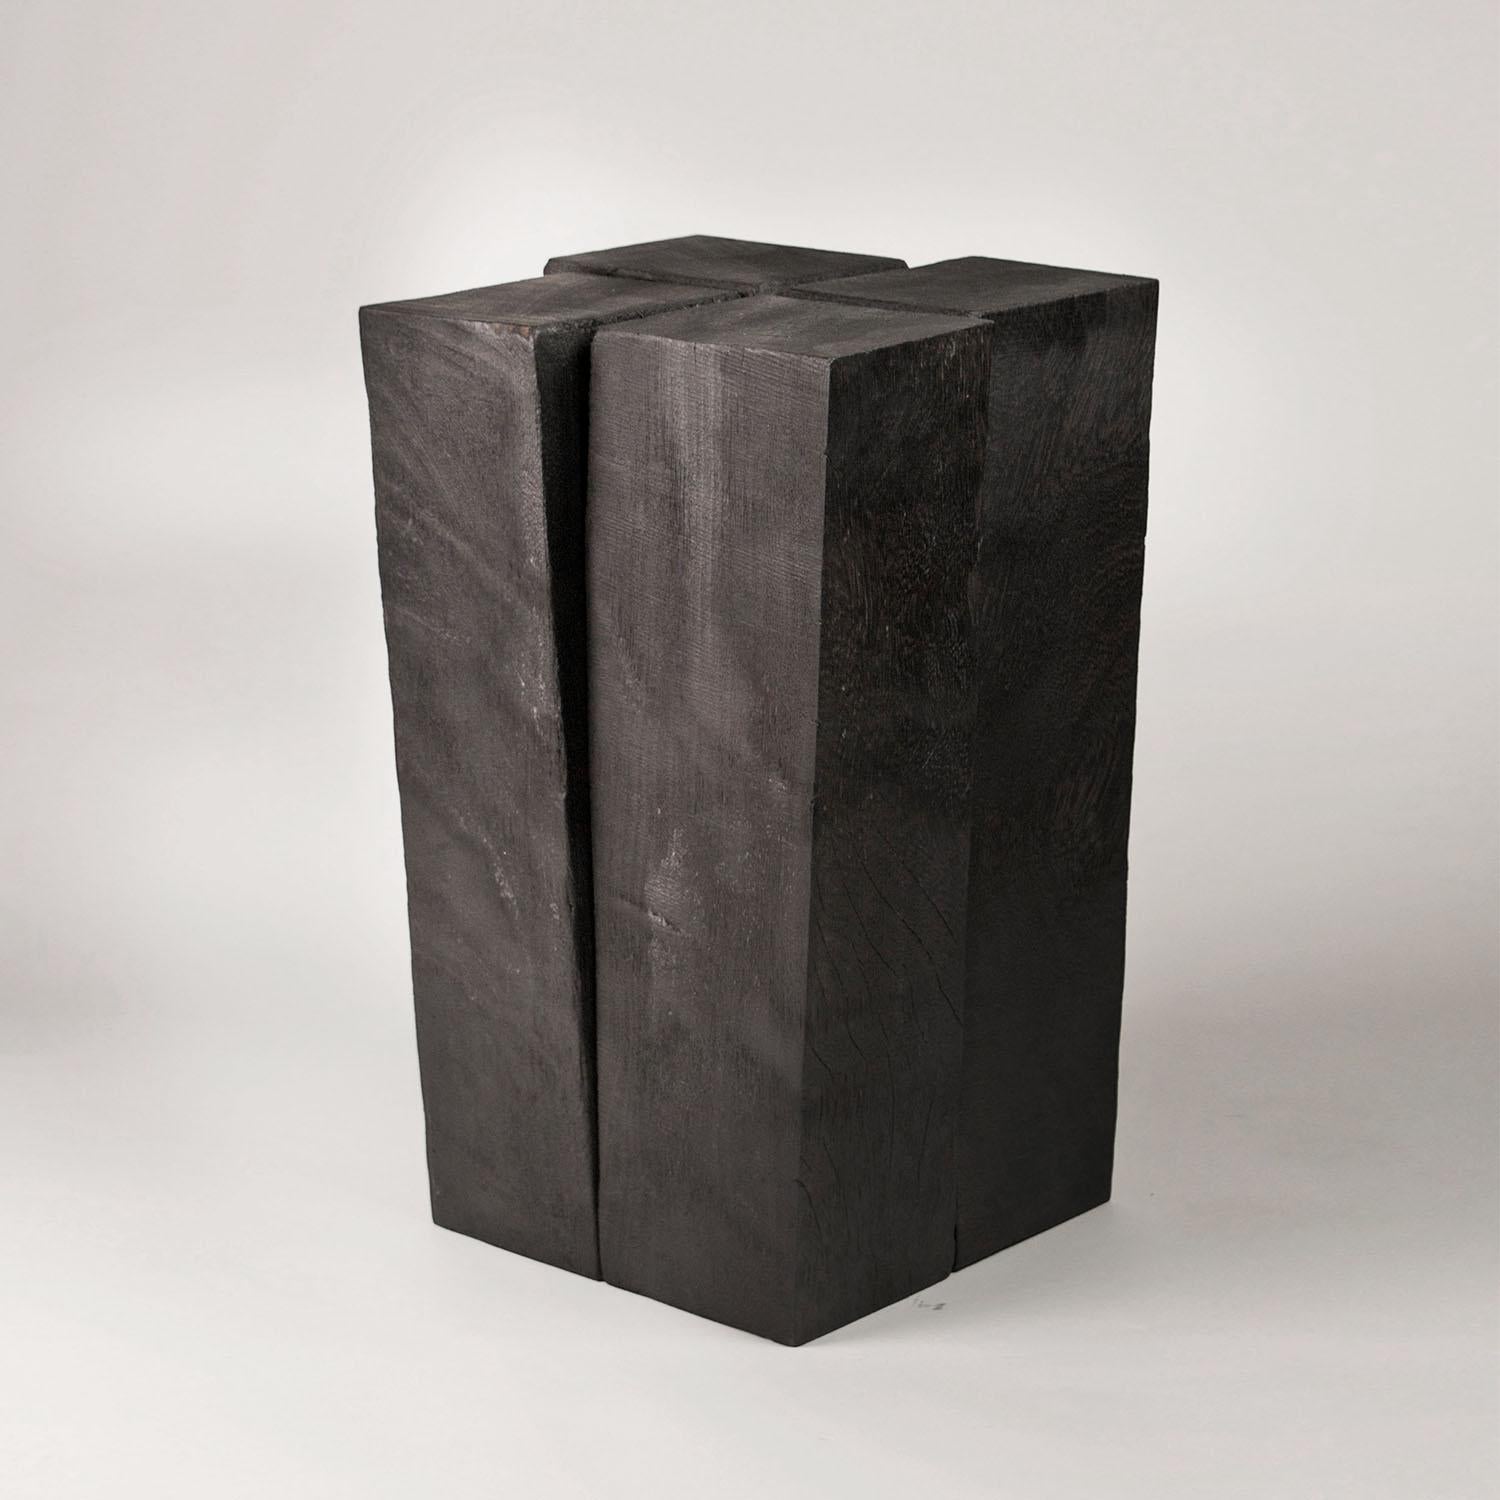 Contemporary black stool in Iroko wood, four legs by Arno Declercq

Dimensions: D32 x W32 x H50 cm
Materials: Burned and waxed Iroko wood

Made by hand, in Belgium.

Arno Declercq
Belgian designer and art dealer who makes bespoke objects